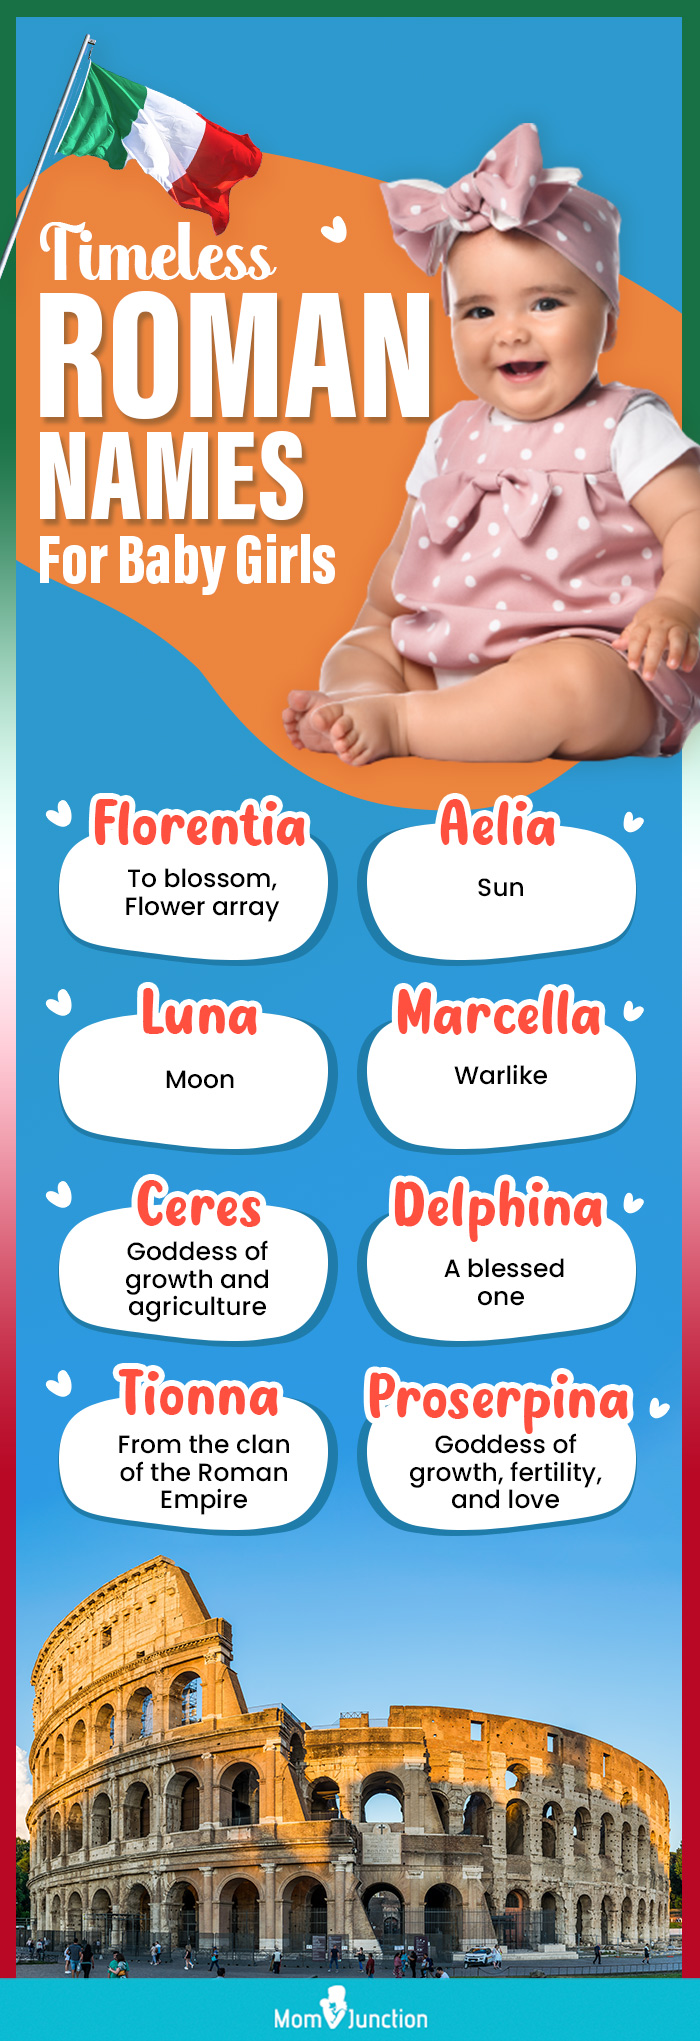 timeless roman names for baby girls (infographic)